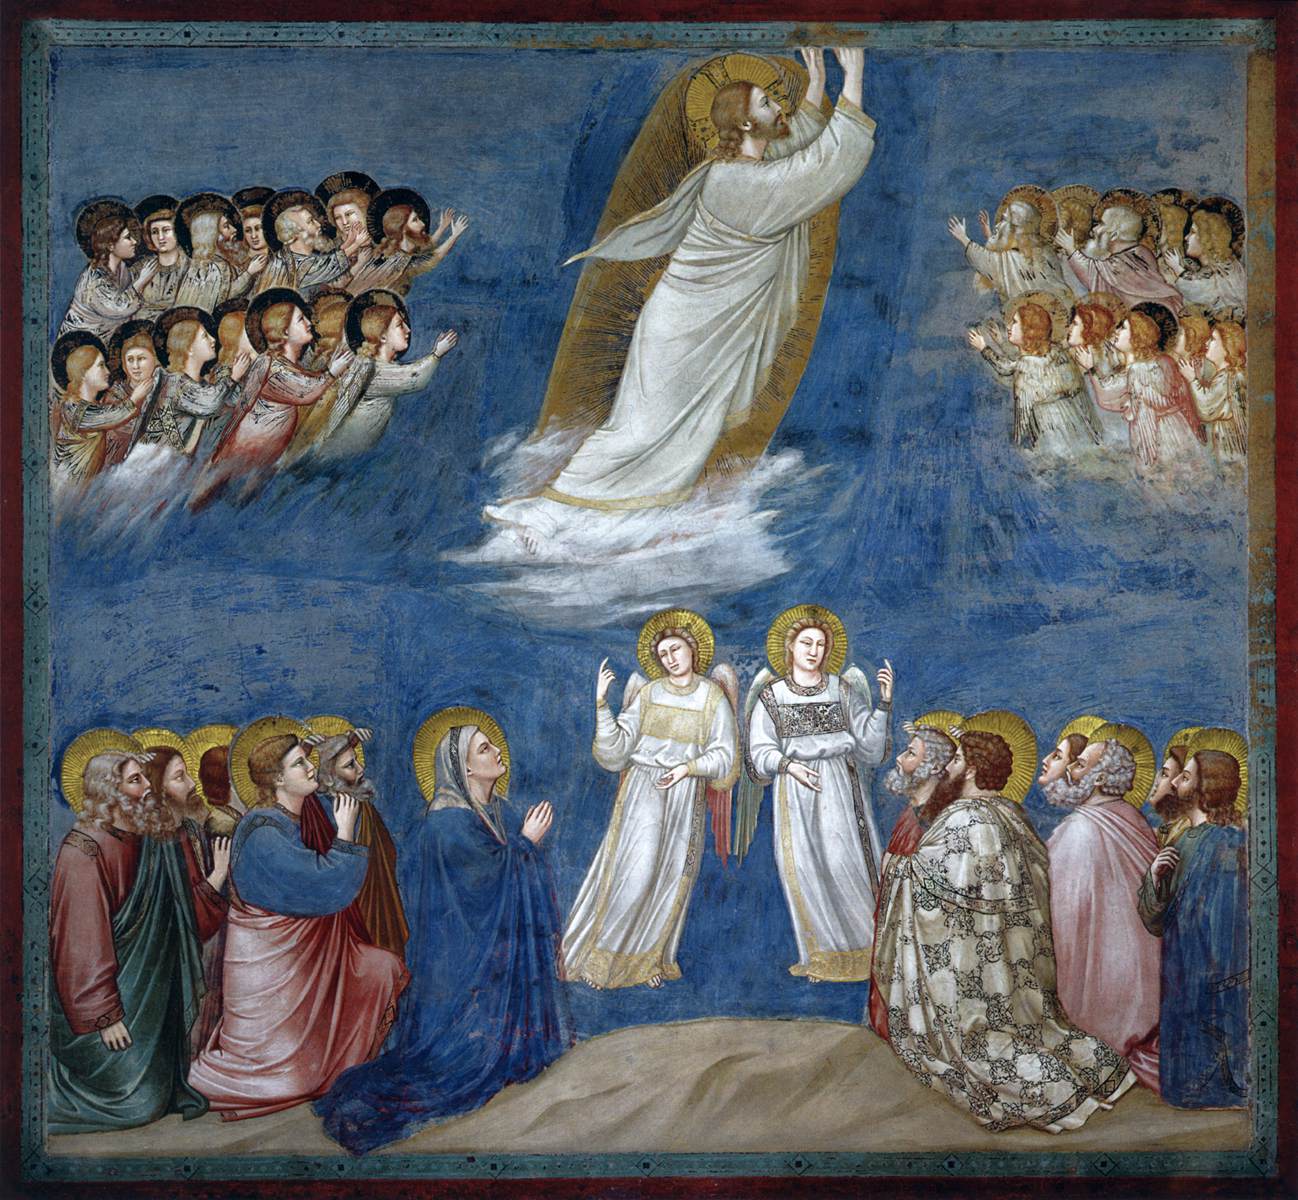 Christ, top center, ascends into heaven, his hands extending beyond the edge of the fresco. Groups of angels are at his left and right. Below, two white-robed figures, center, point up at Christ, while kneeling people to both sides gaze up in wonder.